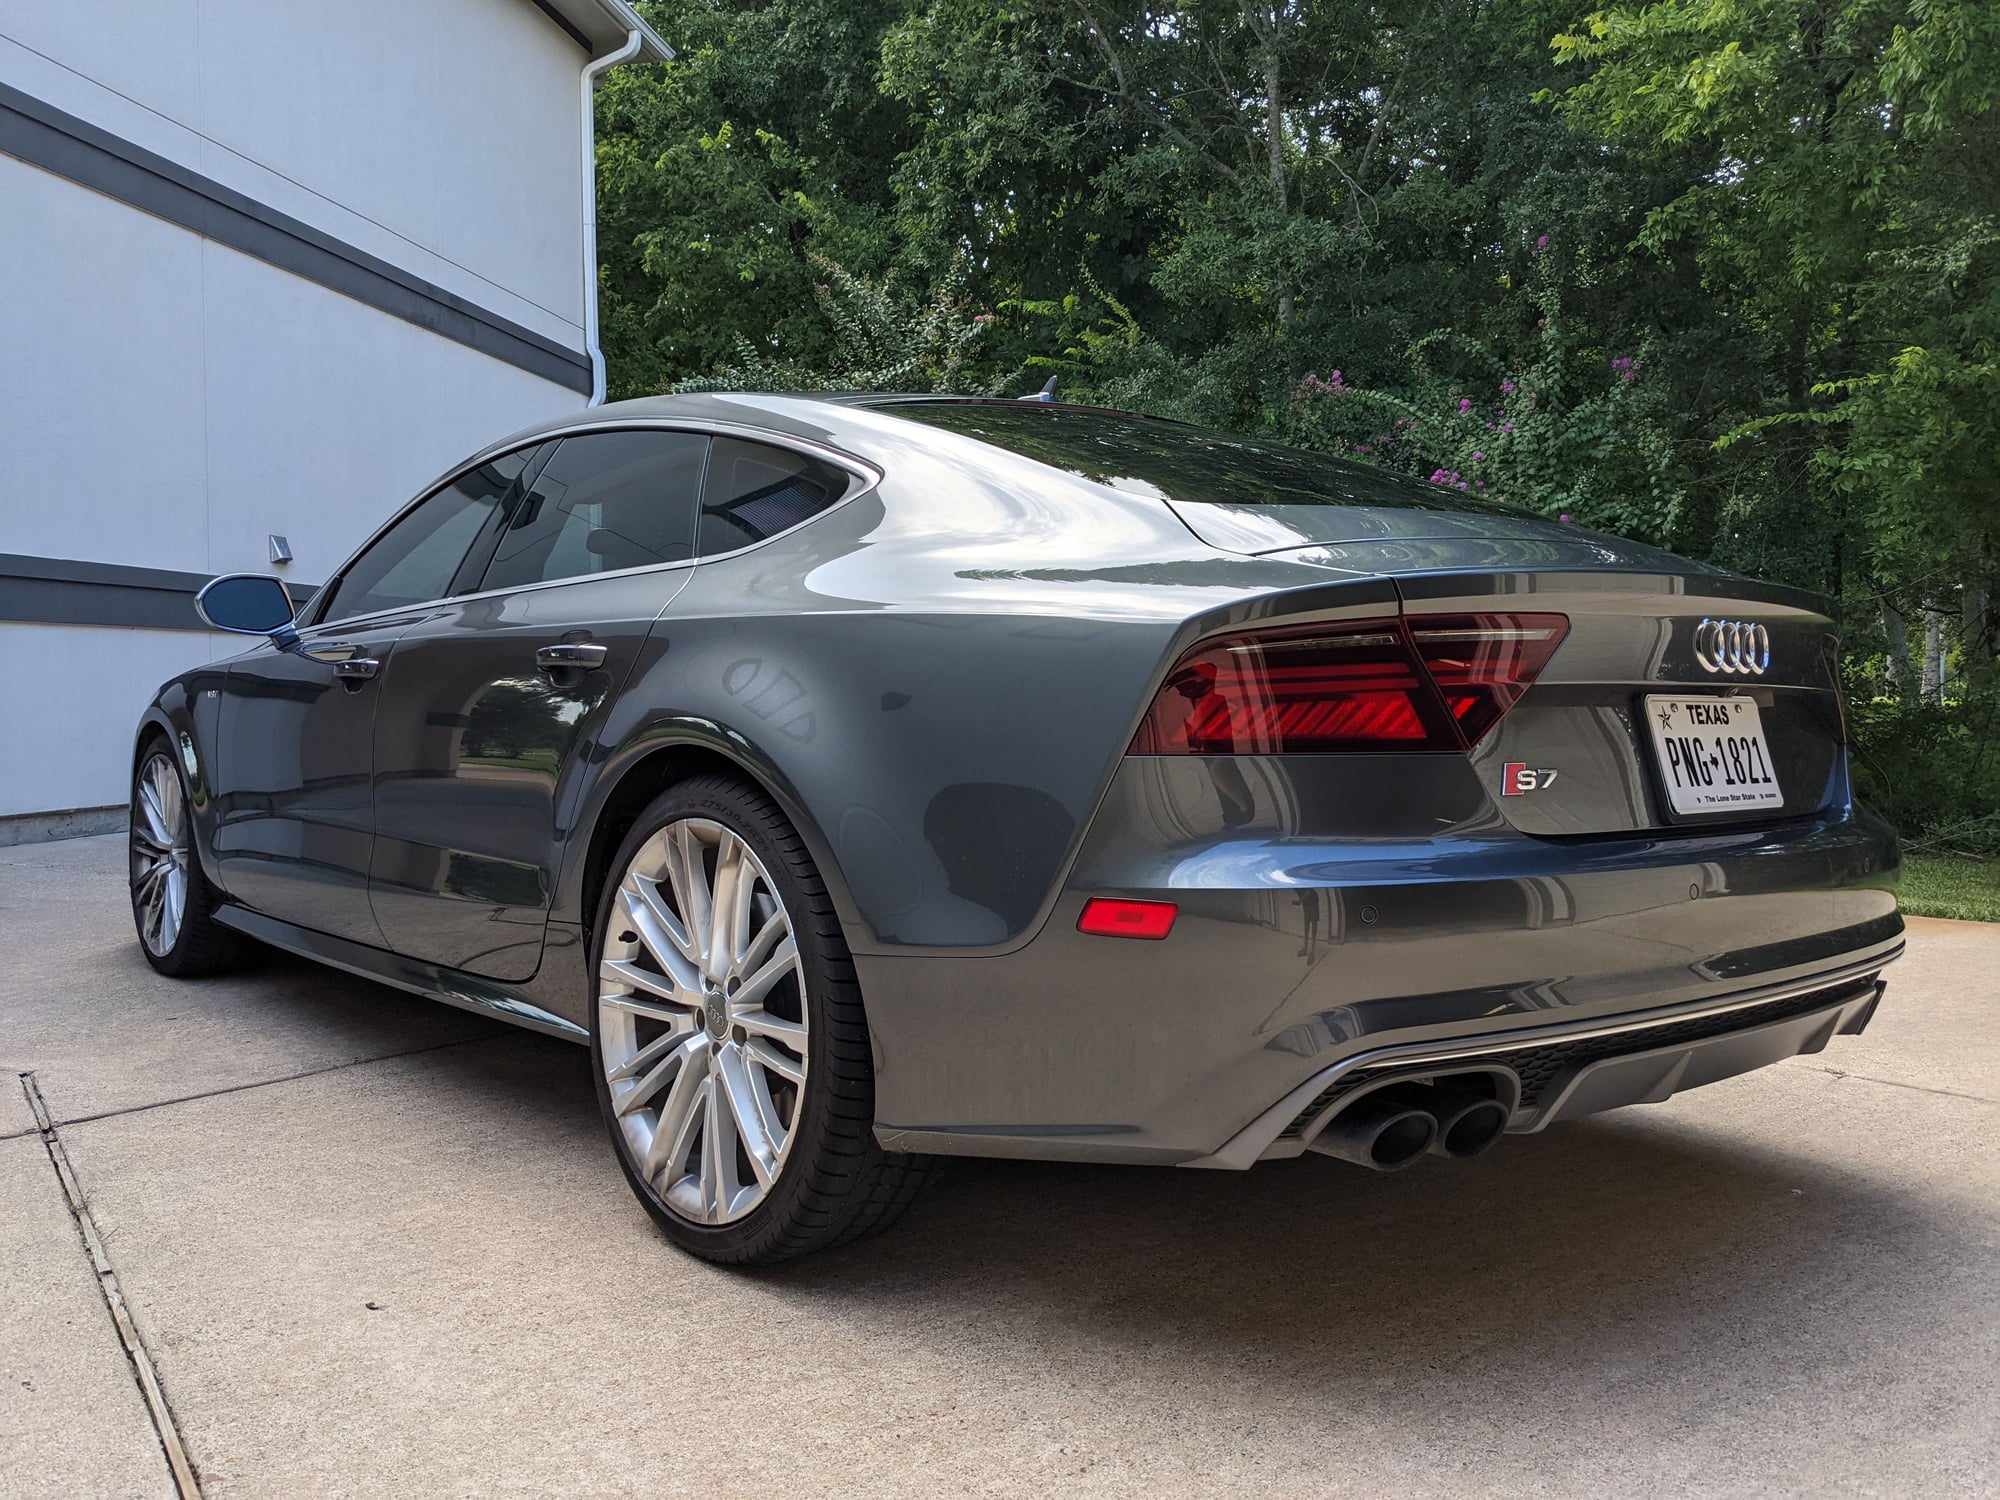 2018 Audi S7 - 2018 Audi S7 Prestige with all options (last of the 4.0 V8 Twin Turbo) CERTIFIED - Used - VIN WAU2FAFC0JN050753 - 15,800 Miles - 8 cyl - 4WD - Automatic - Sedan - Gray - Houston, TX 77002, United States